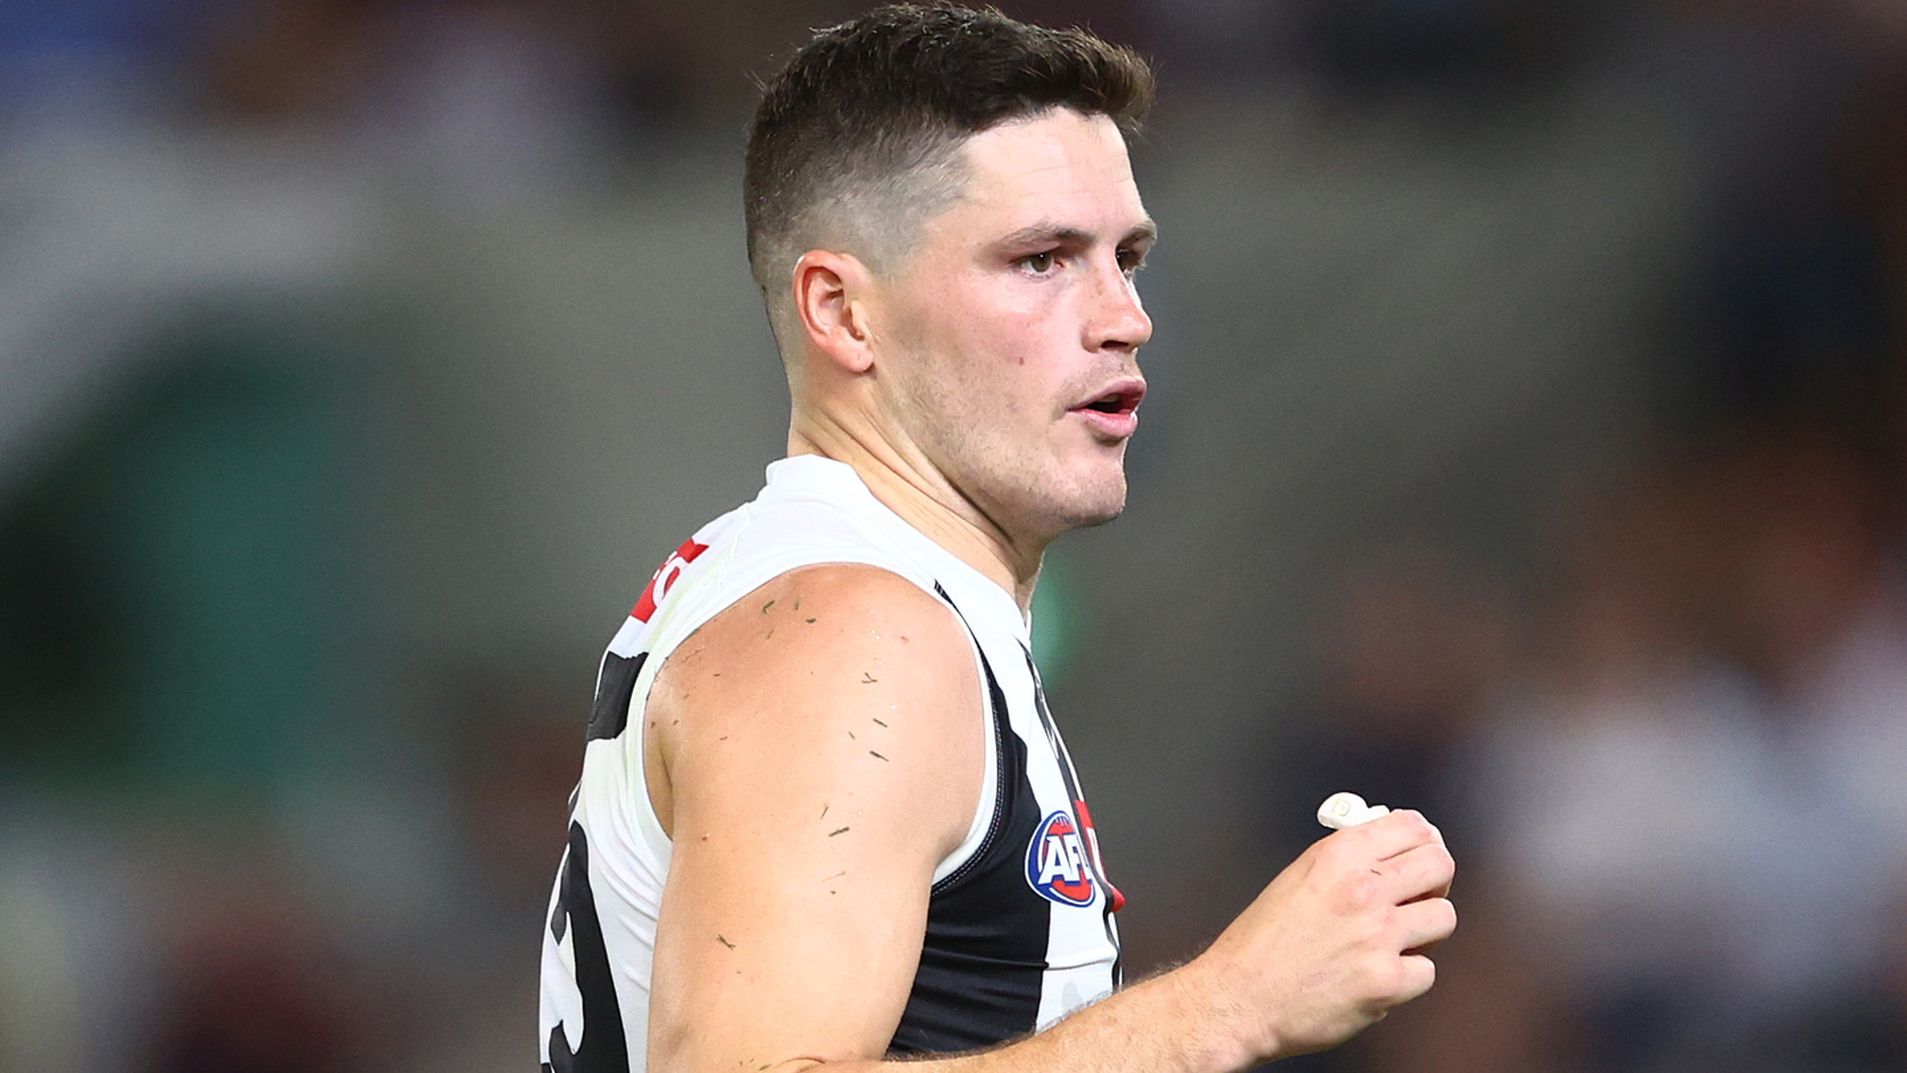 'A work in progress': Collingwood star issues apology, avoids sanction over Snapchat leak